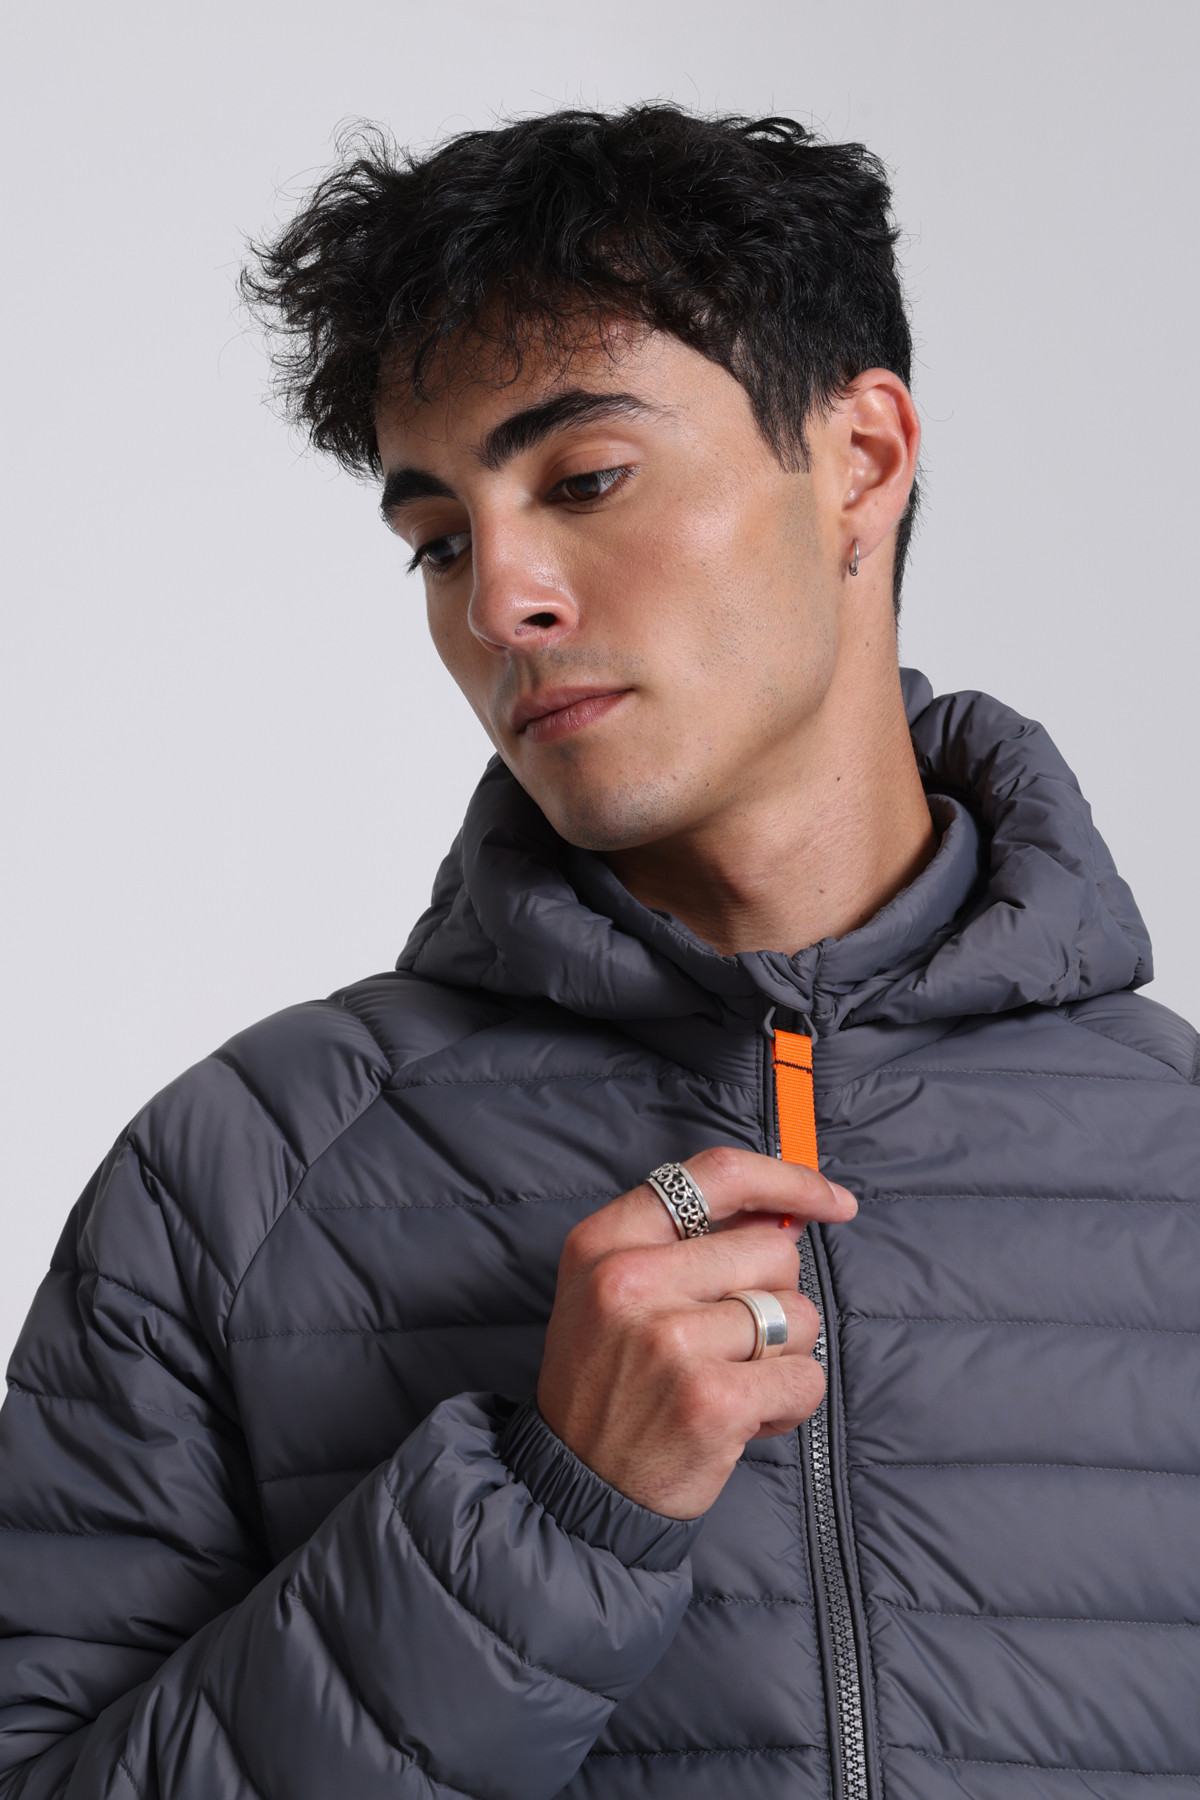 Jacques ultralight down jacket Anthracite